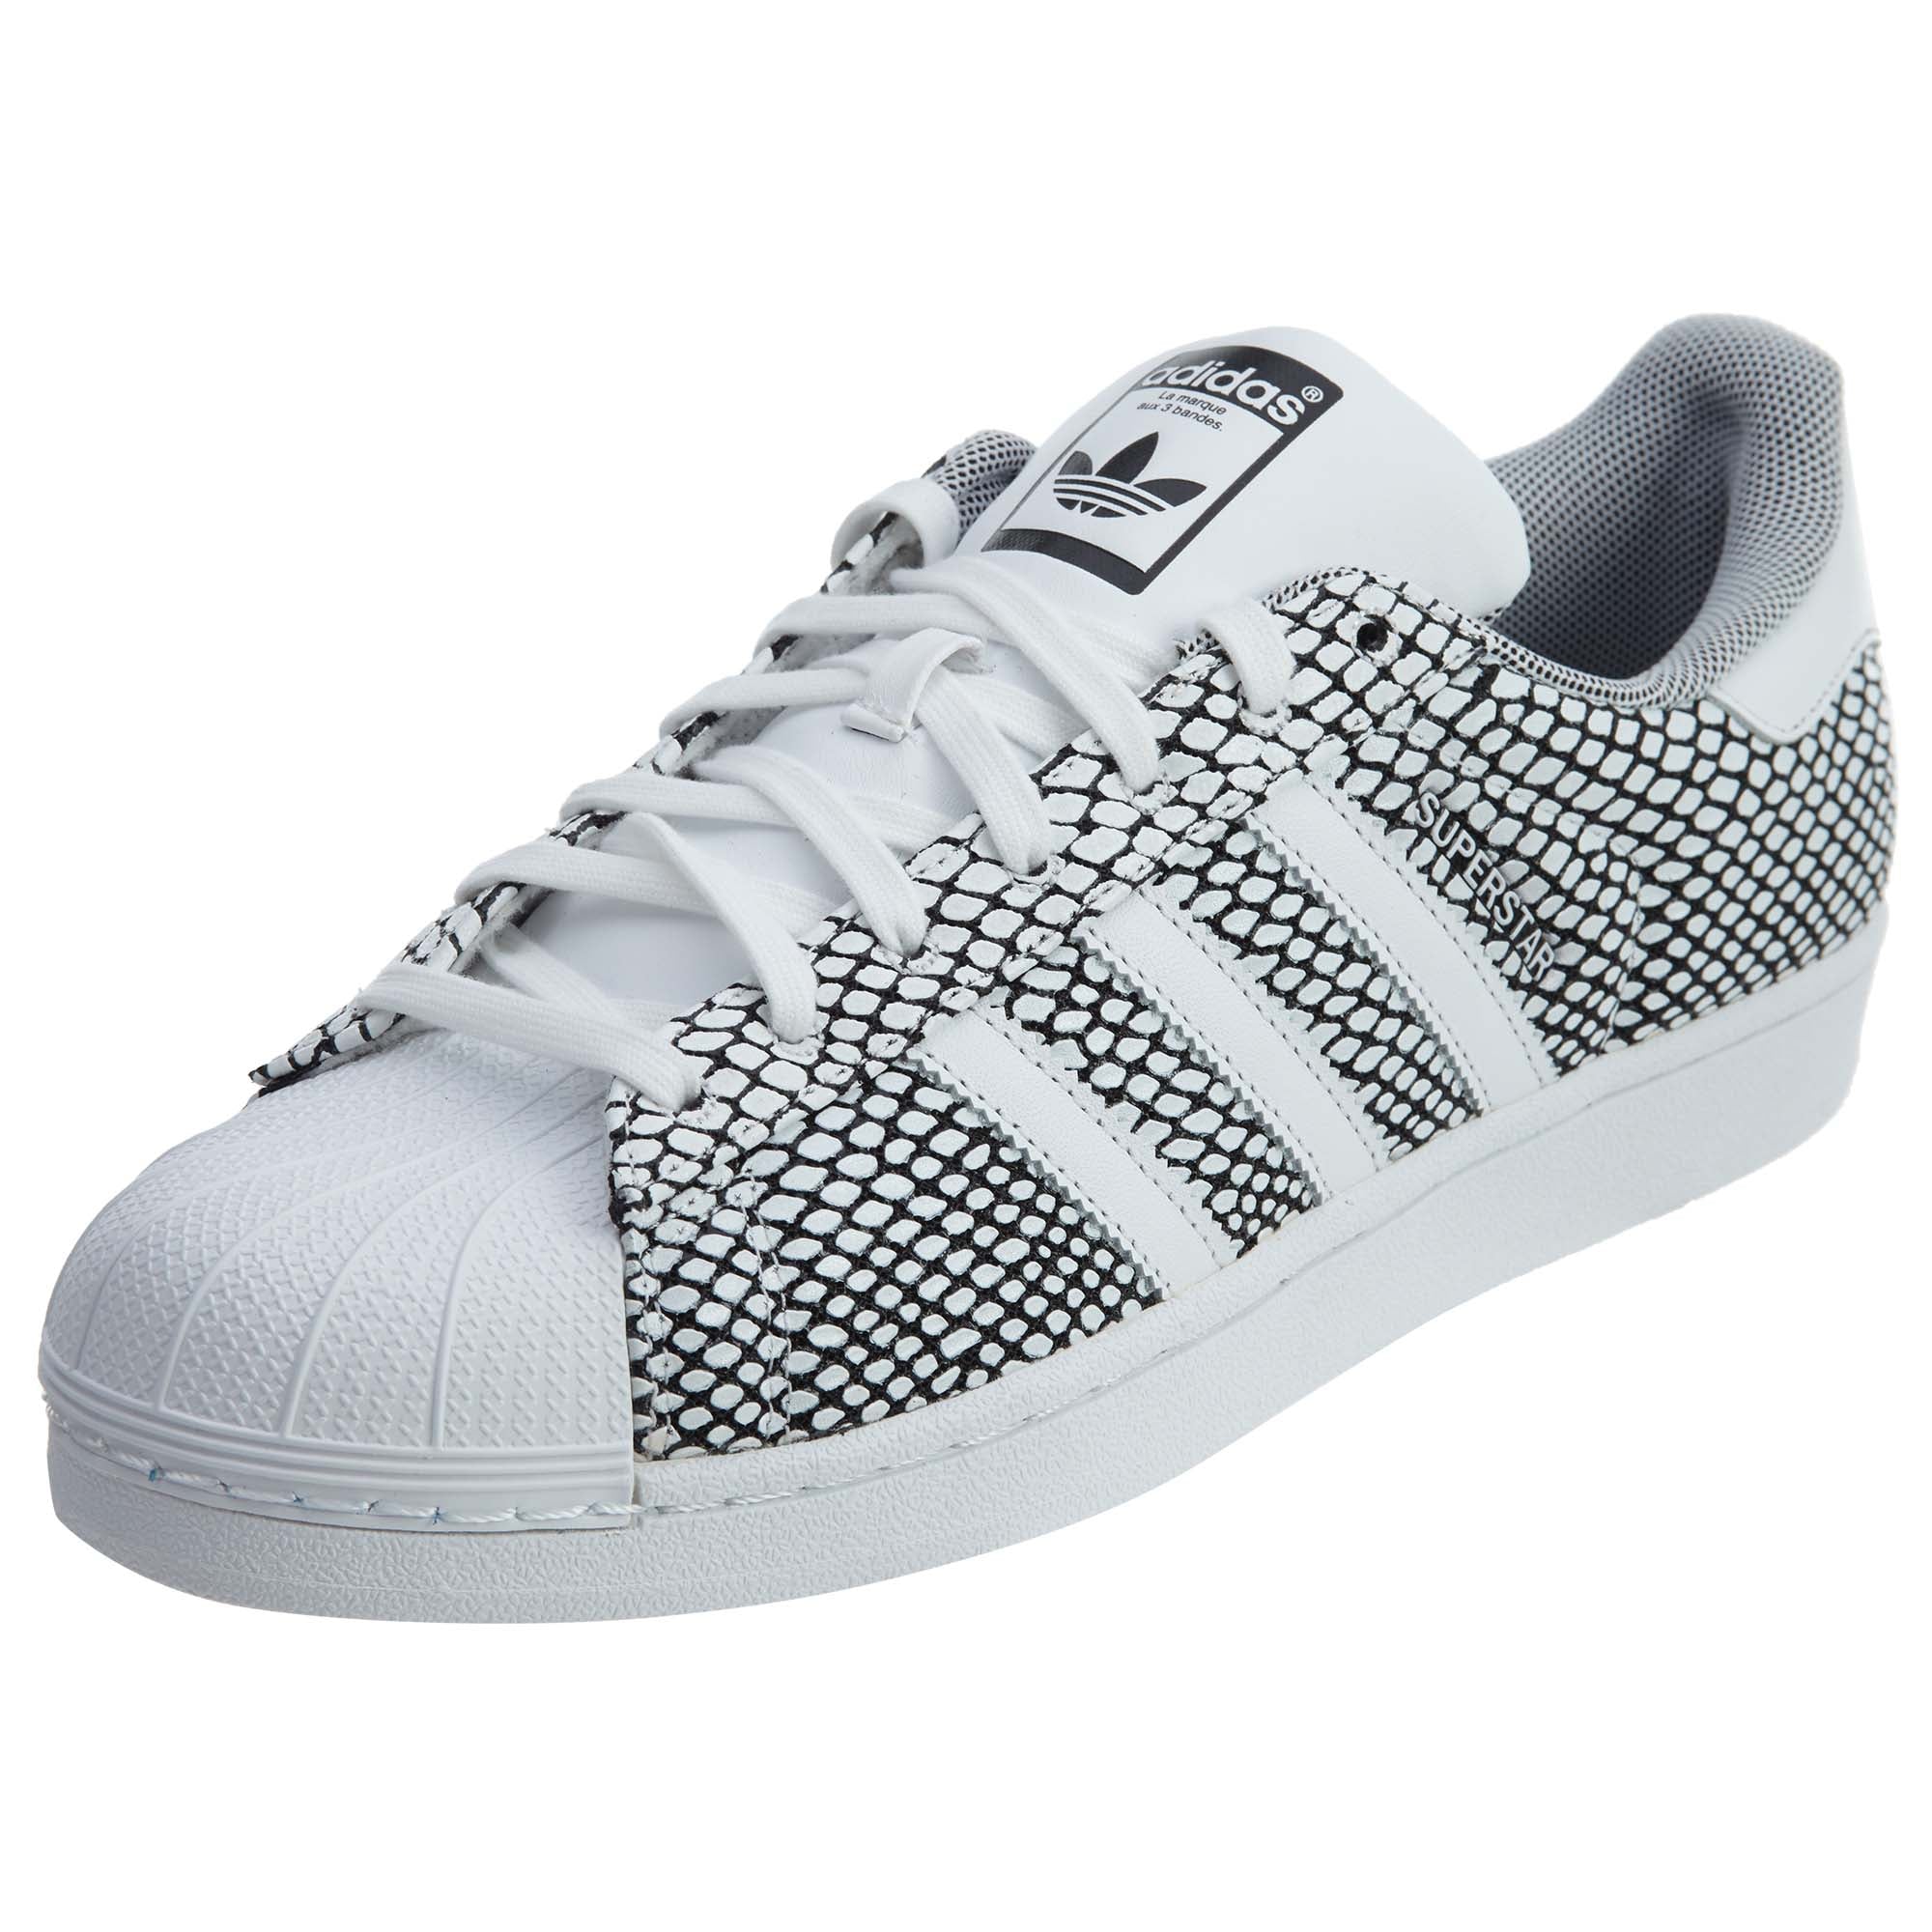 Adidas Superstar Pack Mens Style : S82731